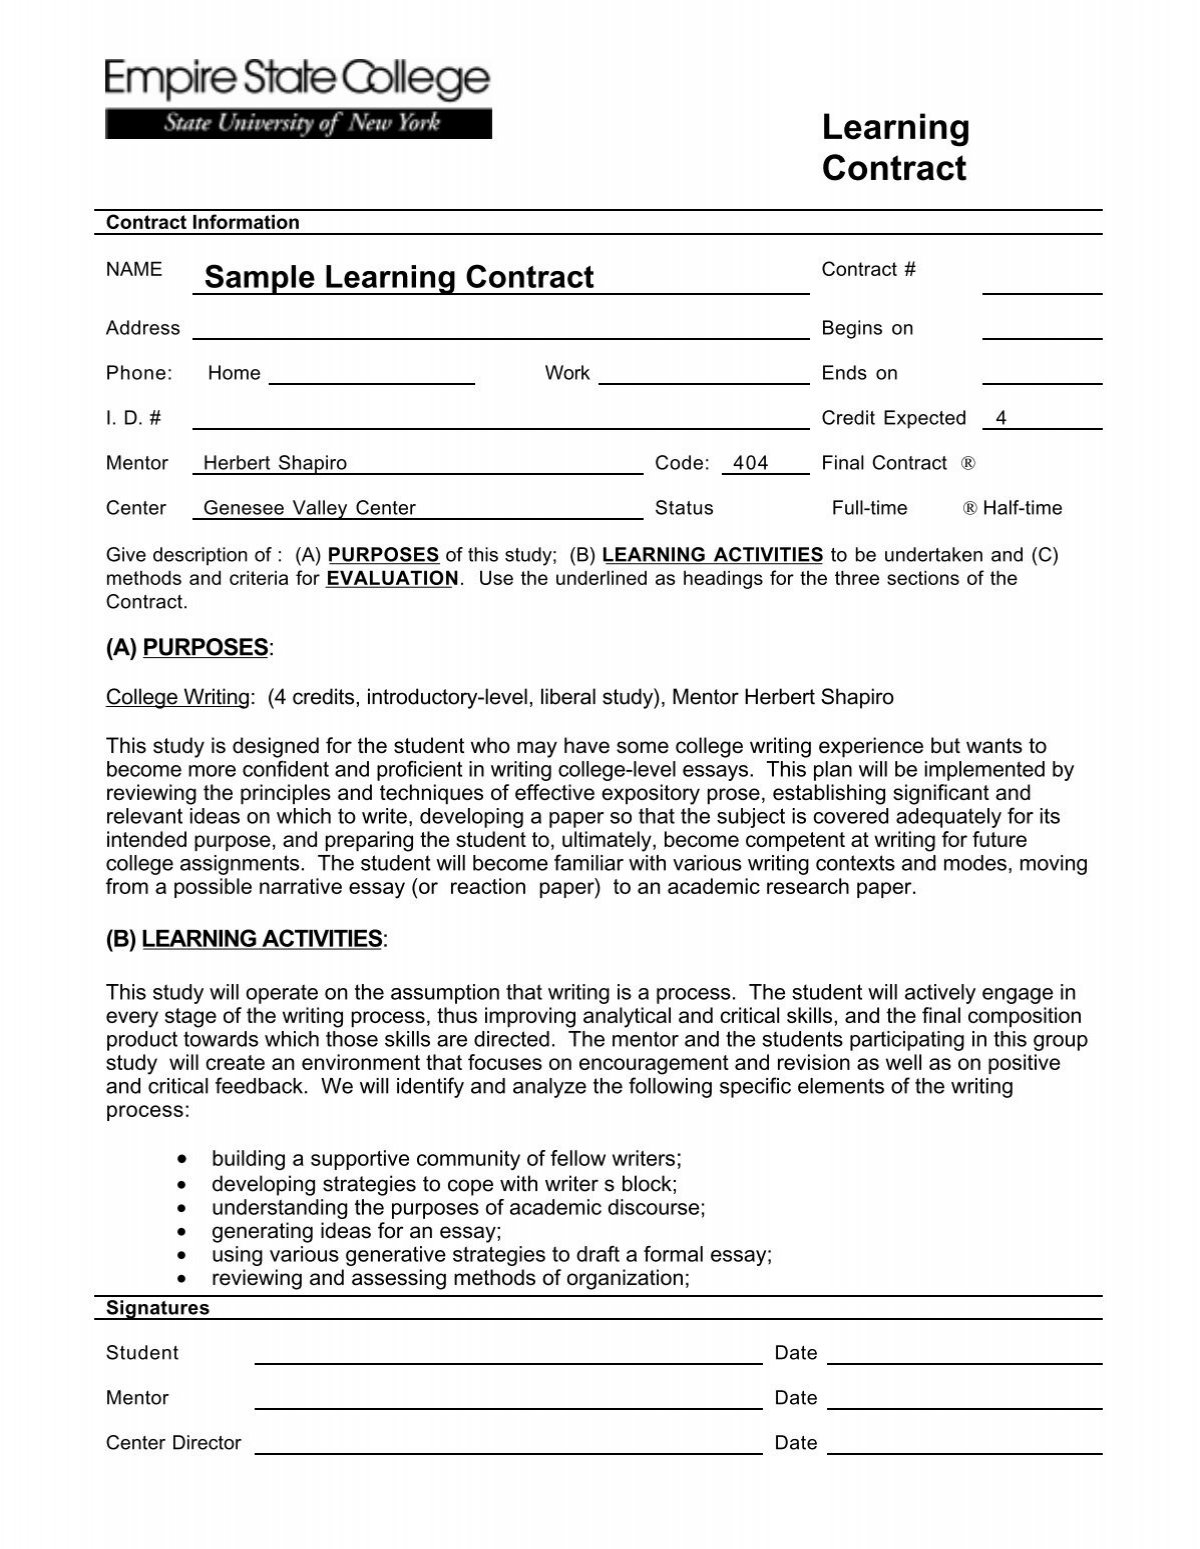 SUNY Empire State College Assignment Writing Services - Online Class  Services